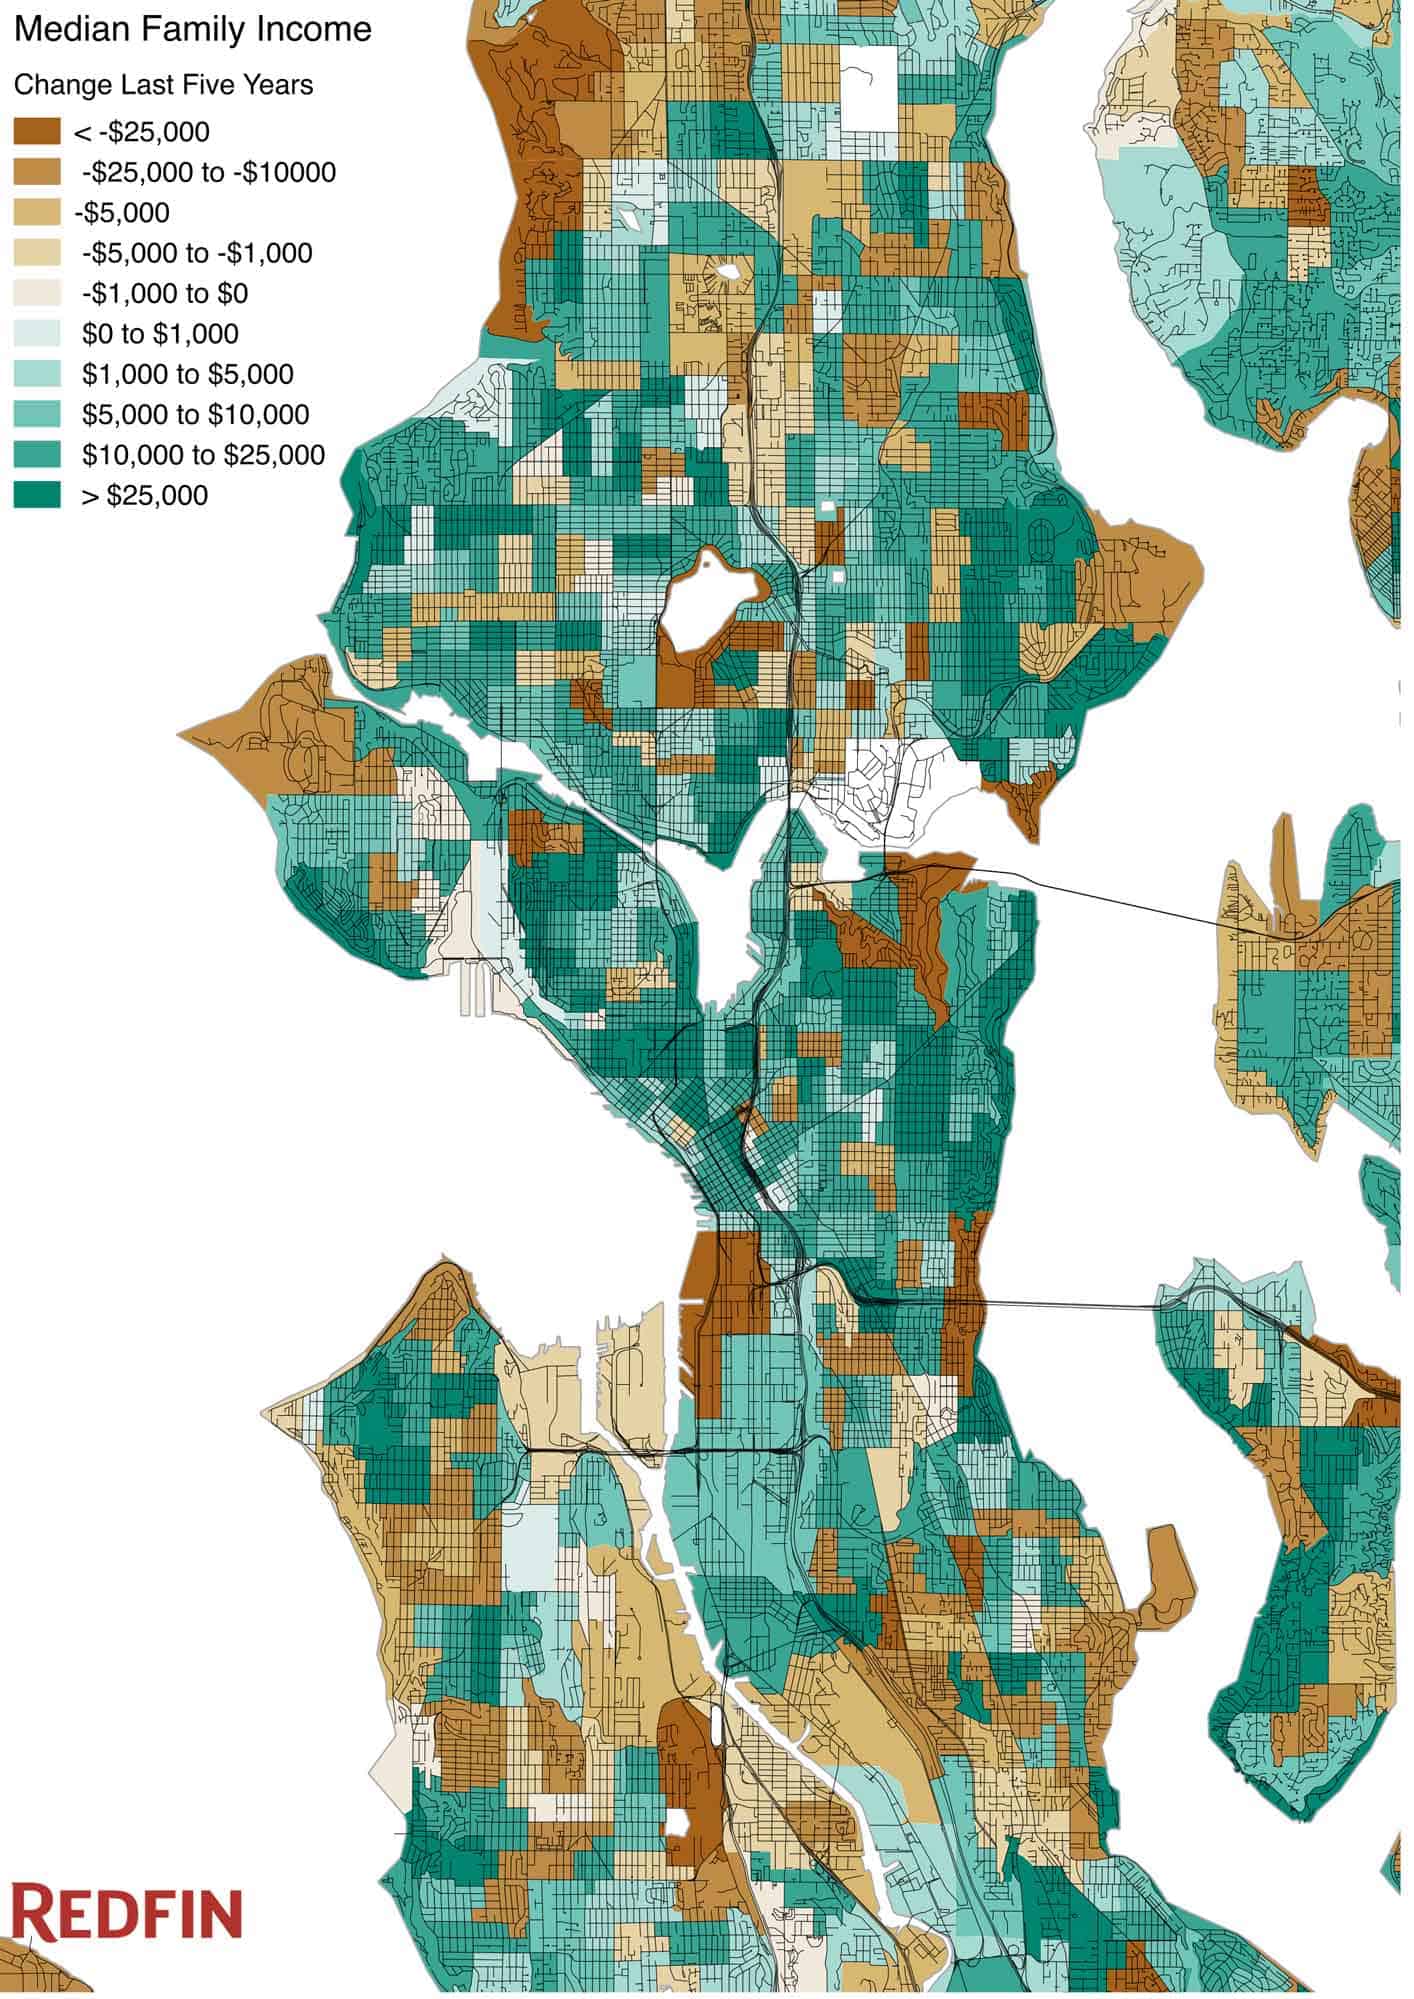 Seattle Median Income Change Map